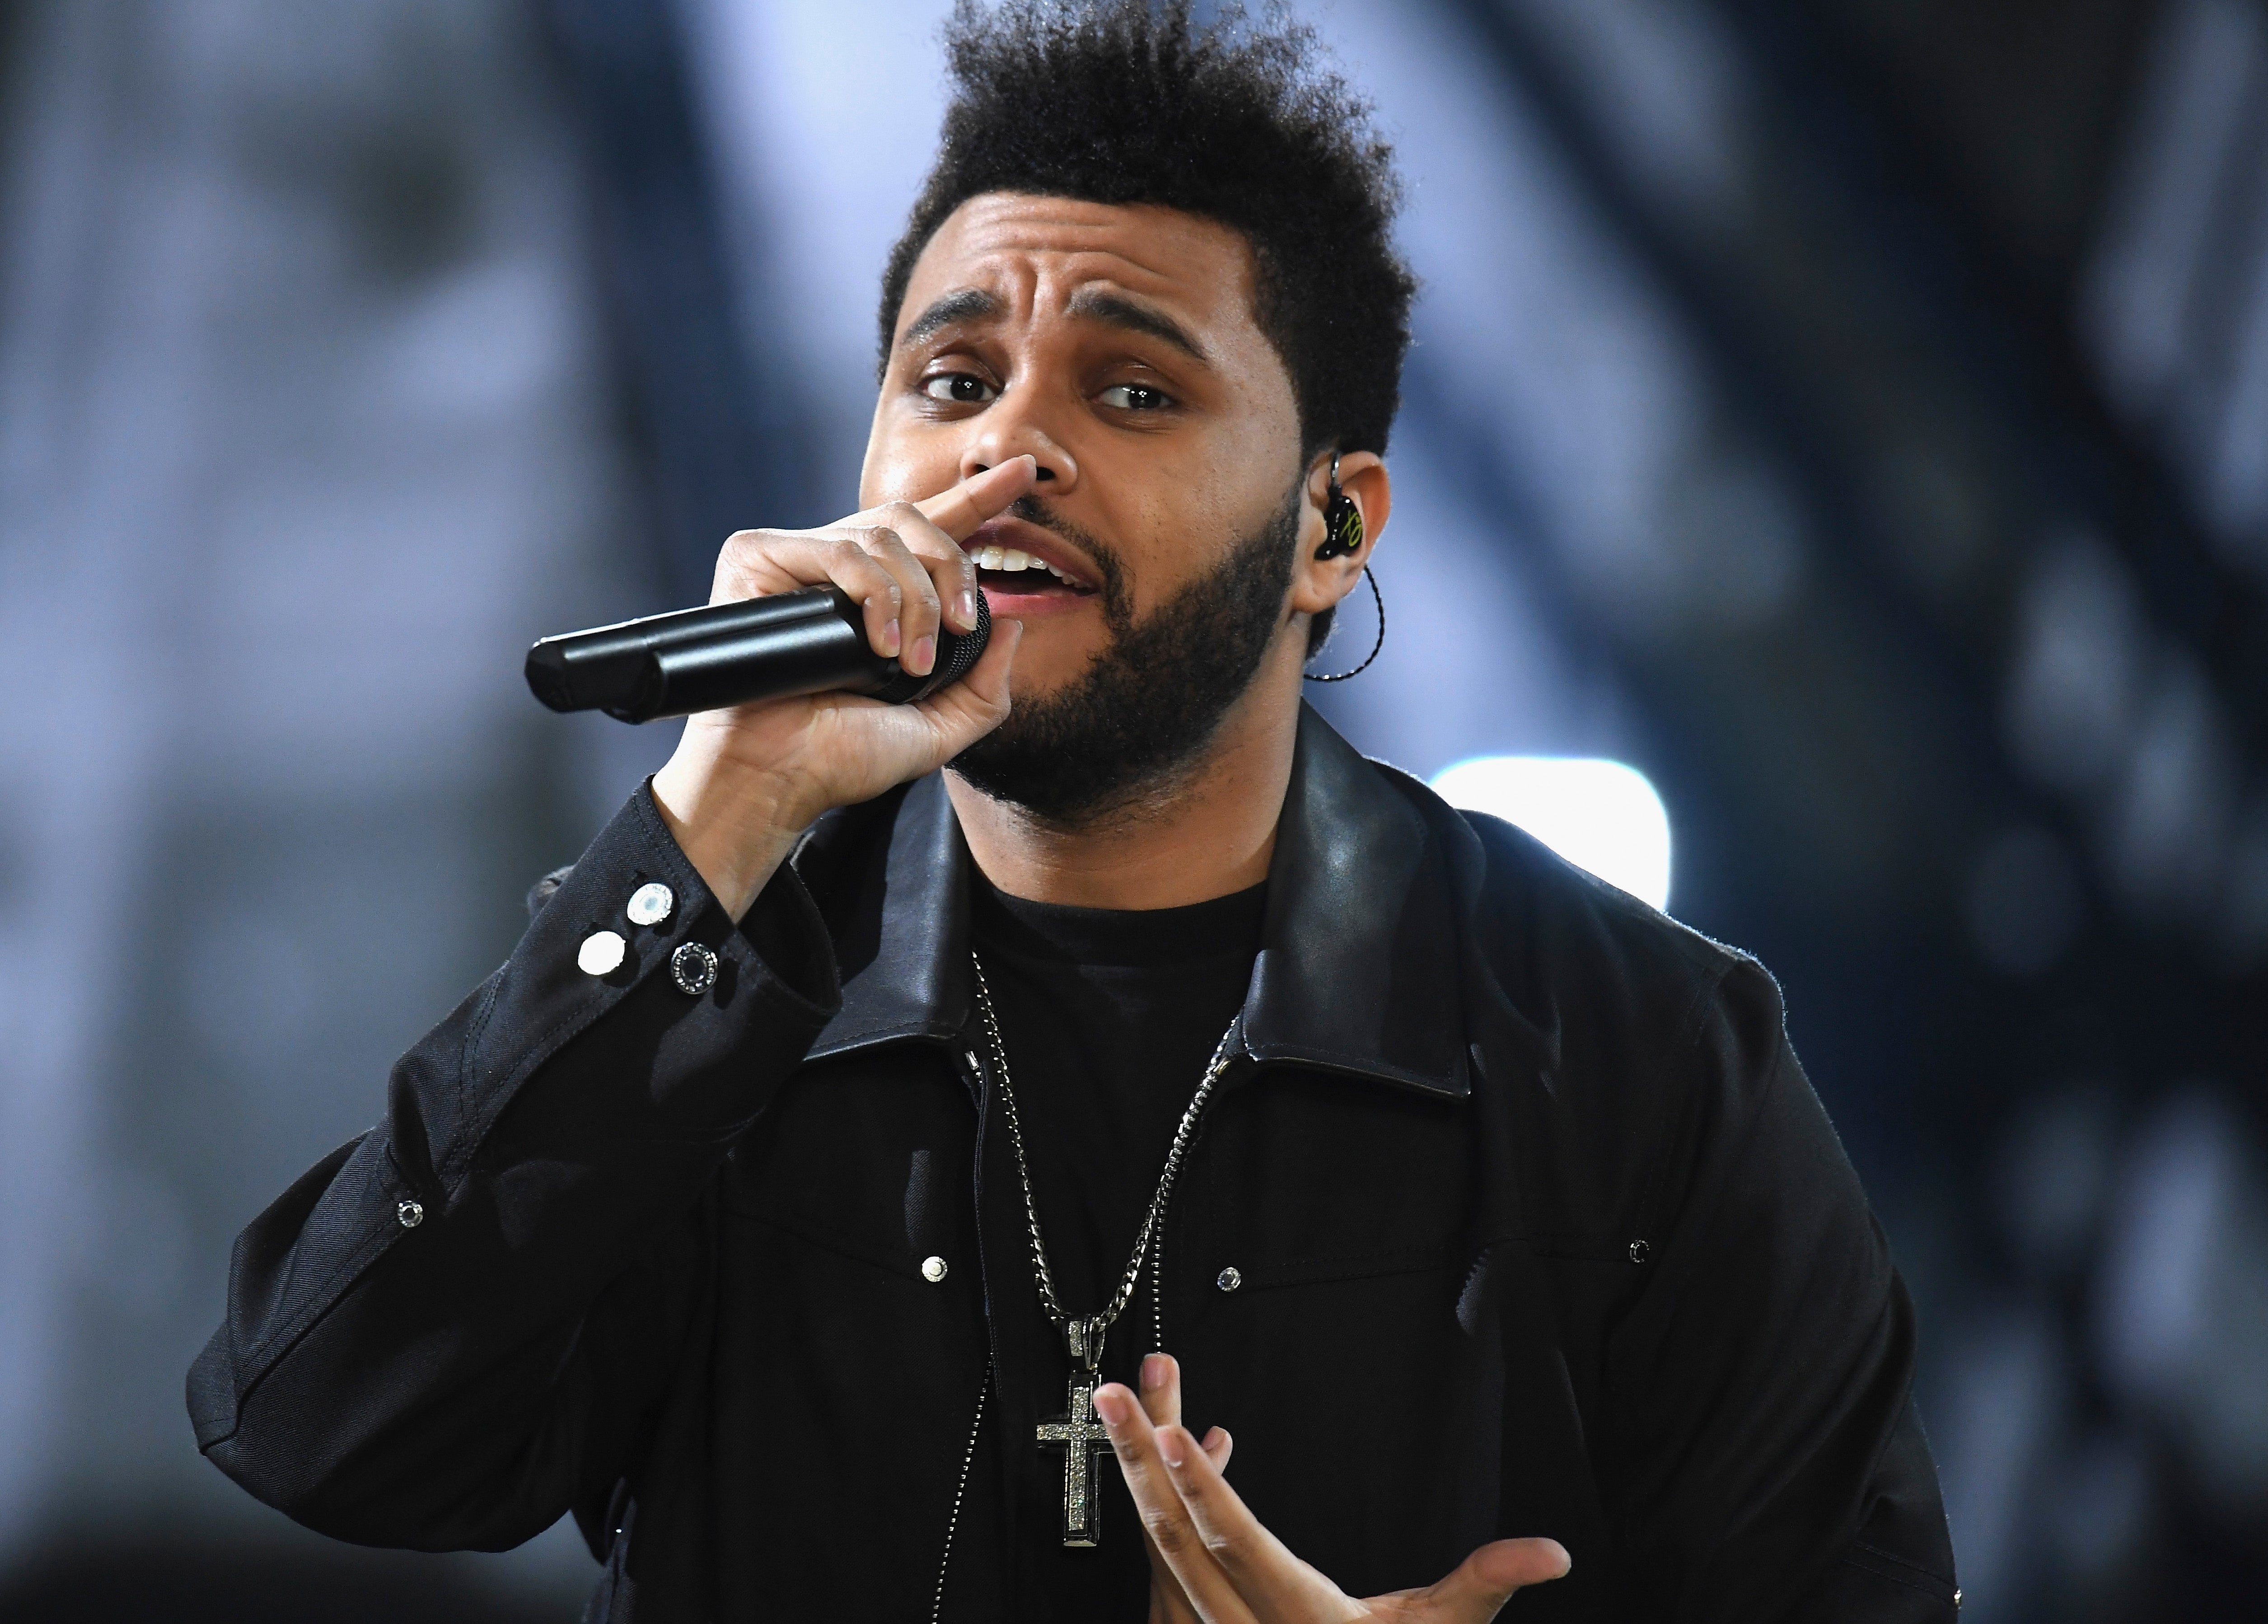 The Weeknd was snubbed in the 2021 Grammy nominations